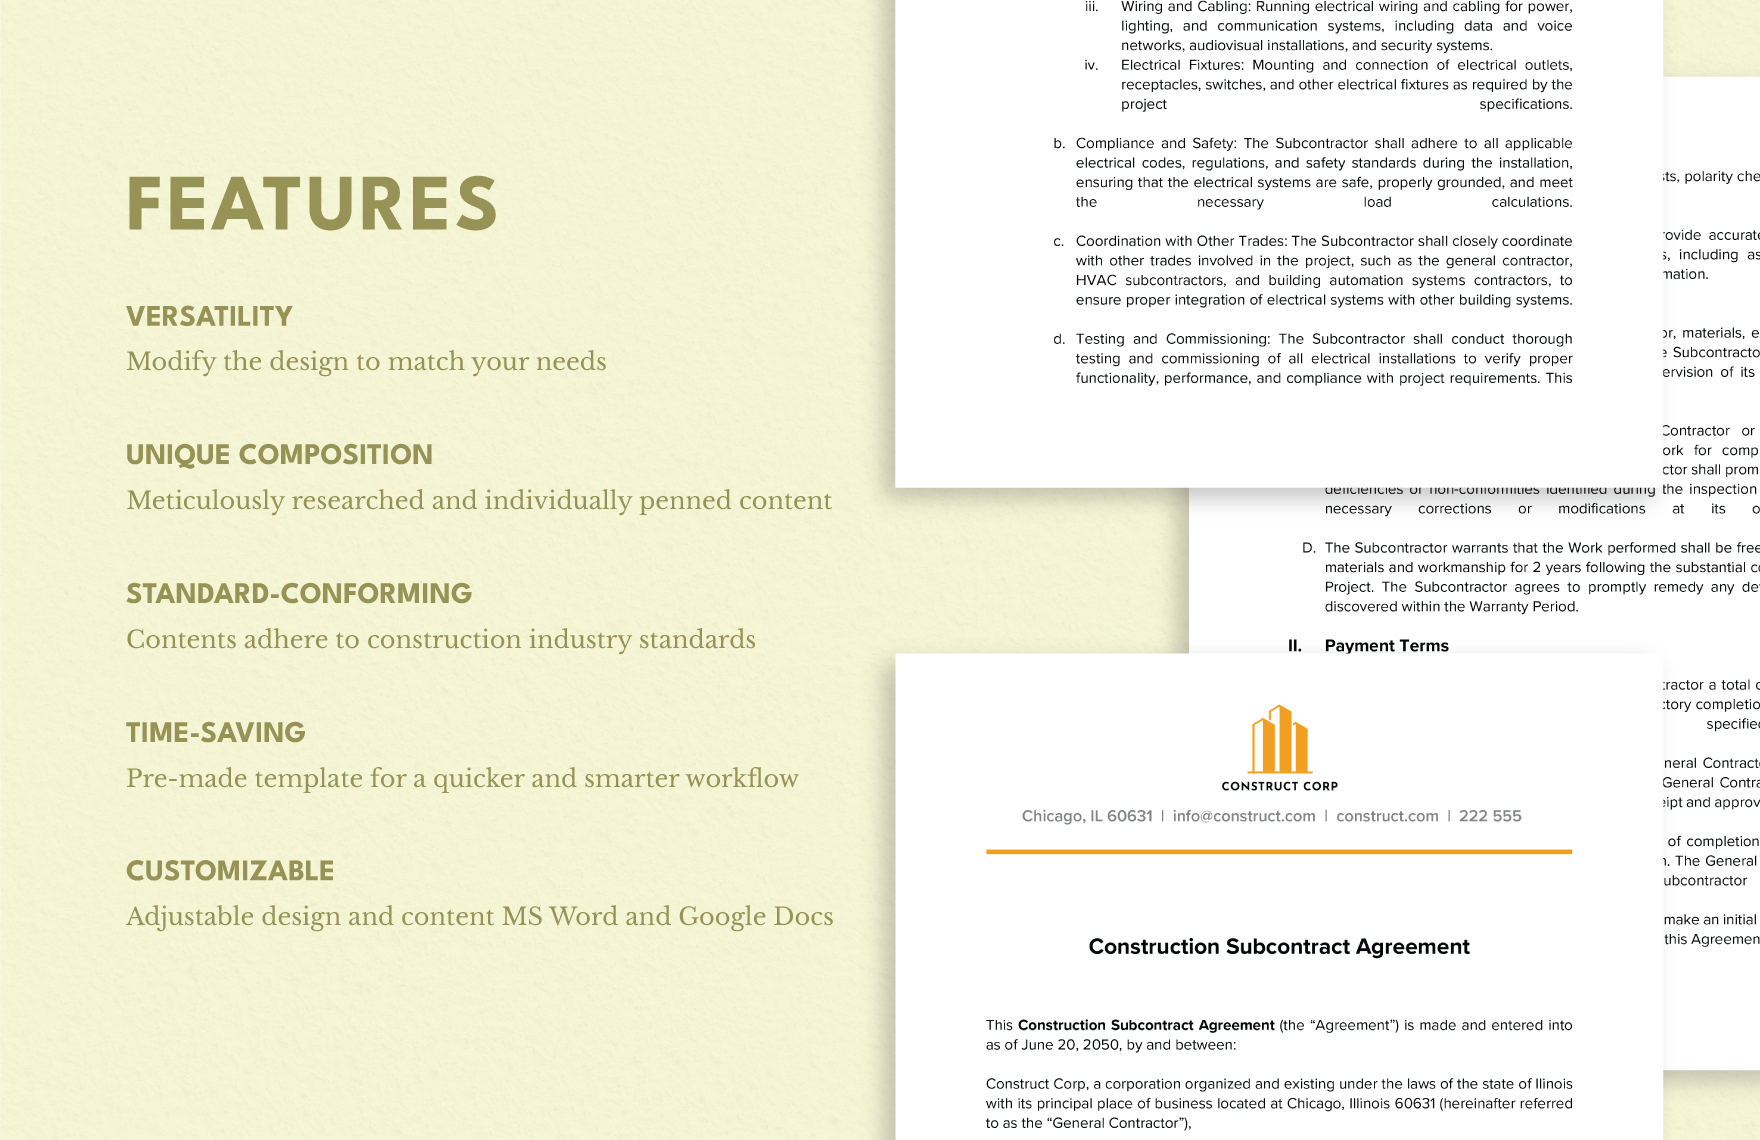 Construction Subcontract Agreement Template in Word, Google Docs ...